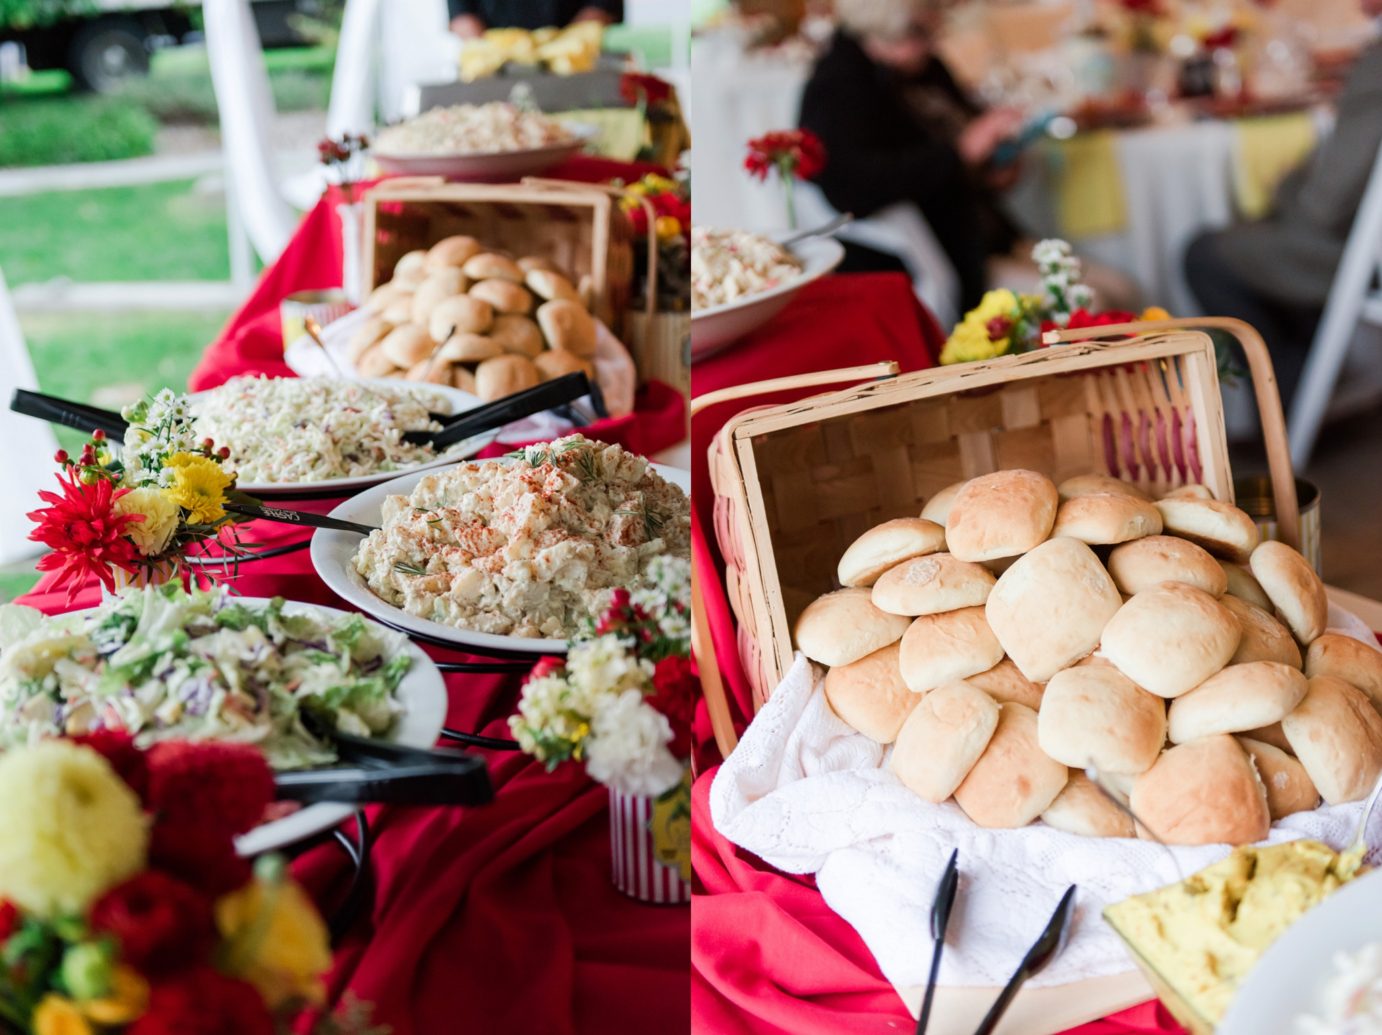 promise garden reception Castle catering wedding food photo